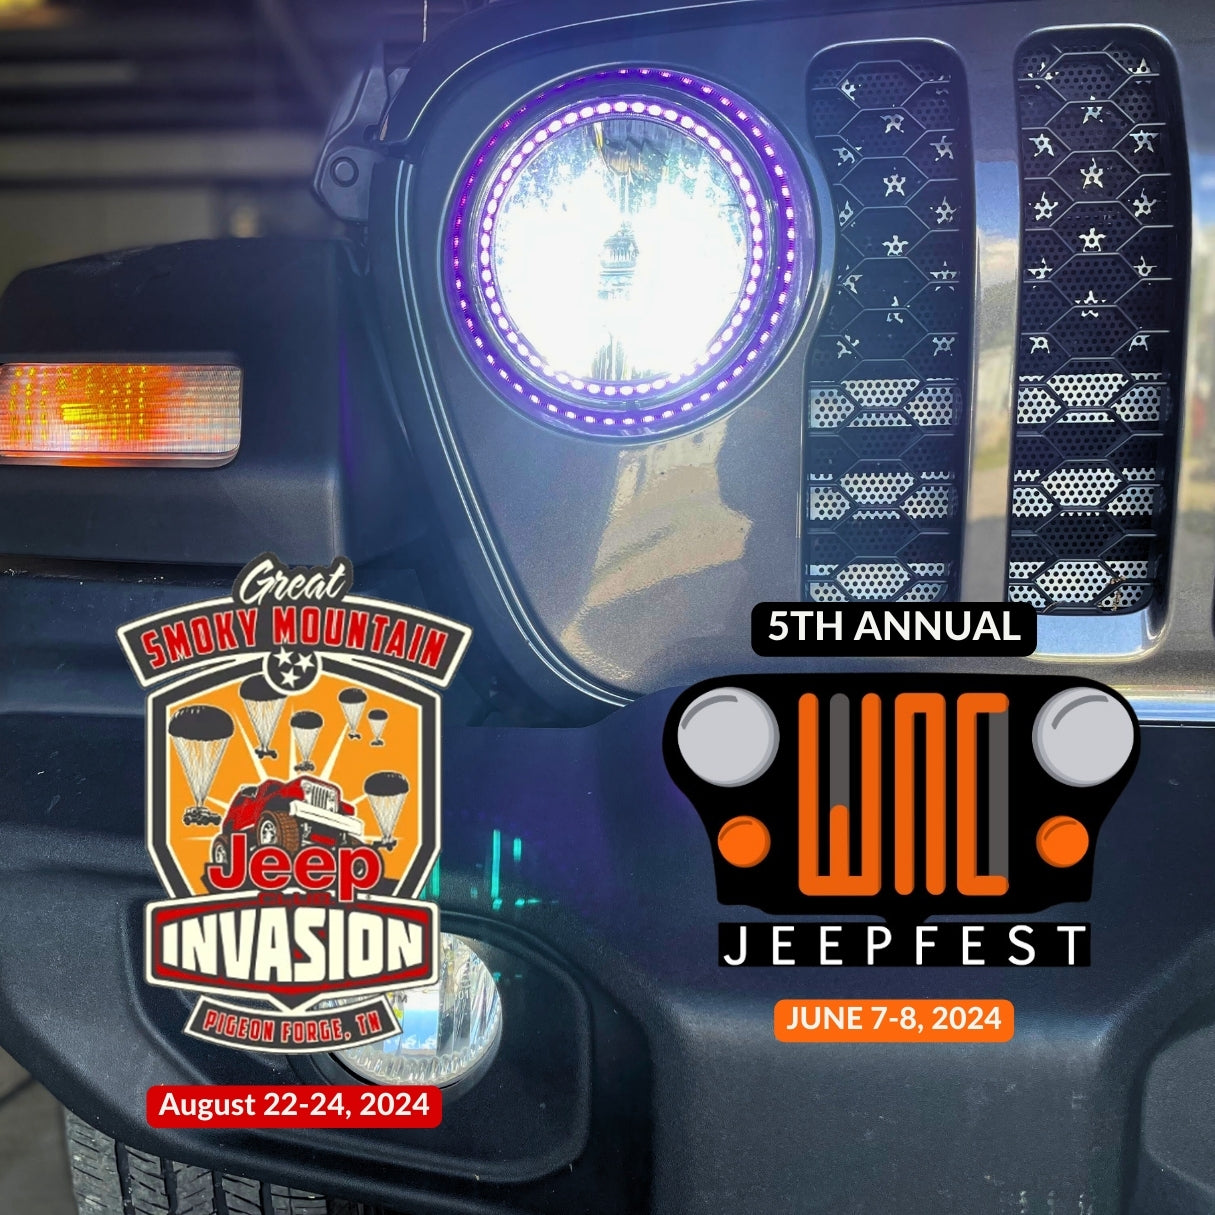 Sparksmith's Summer Jeep Adventures: Join Us at WNC Jeep Fest and The Great Smoky Mountain Jeep Invasion!